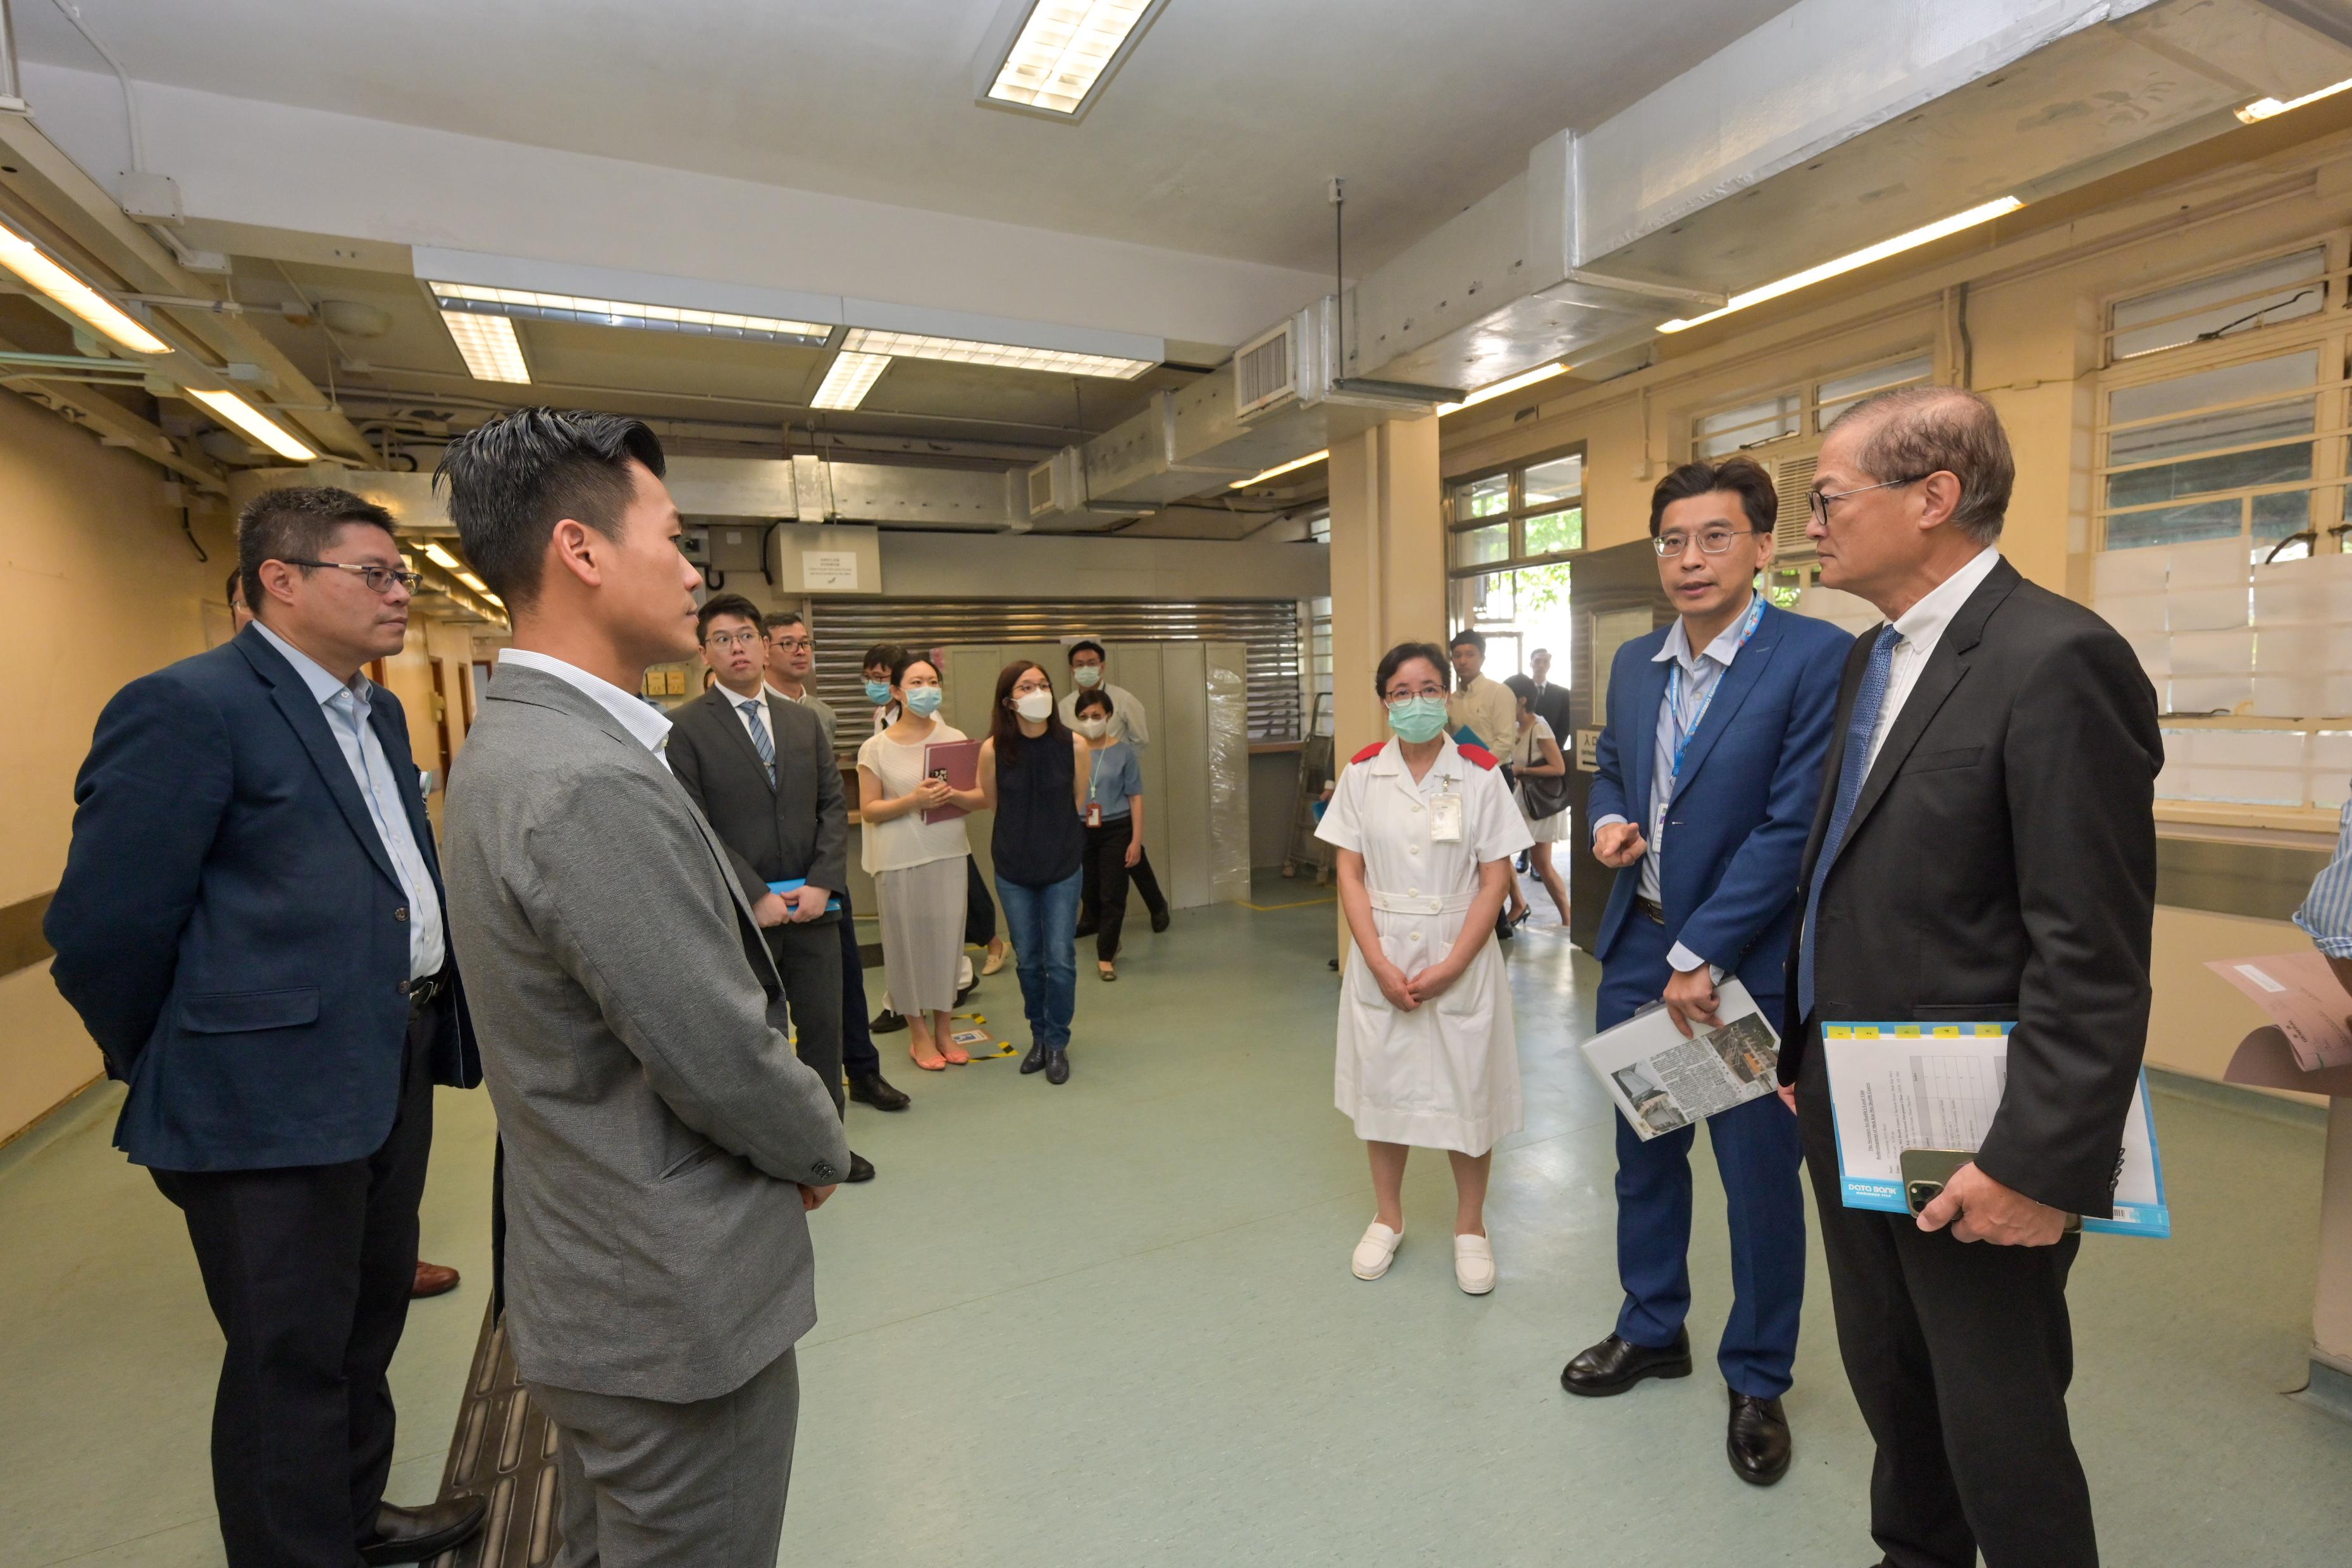 The Secretary for Health, Professor Lo Chung-mau, visited the Shek Kip Mei Health Centre and the temporary Shek Kip Mei General Out-patient Clinic this morning (September 27). Photos shows Professor Lo (first right) learning the redevelopment details at the Shek Kip Mei Health Centre.